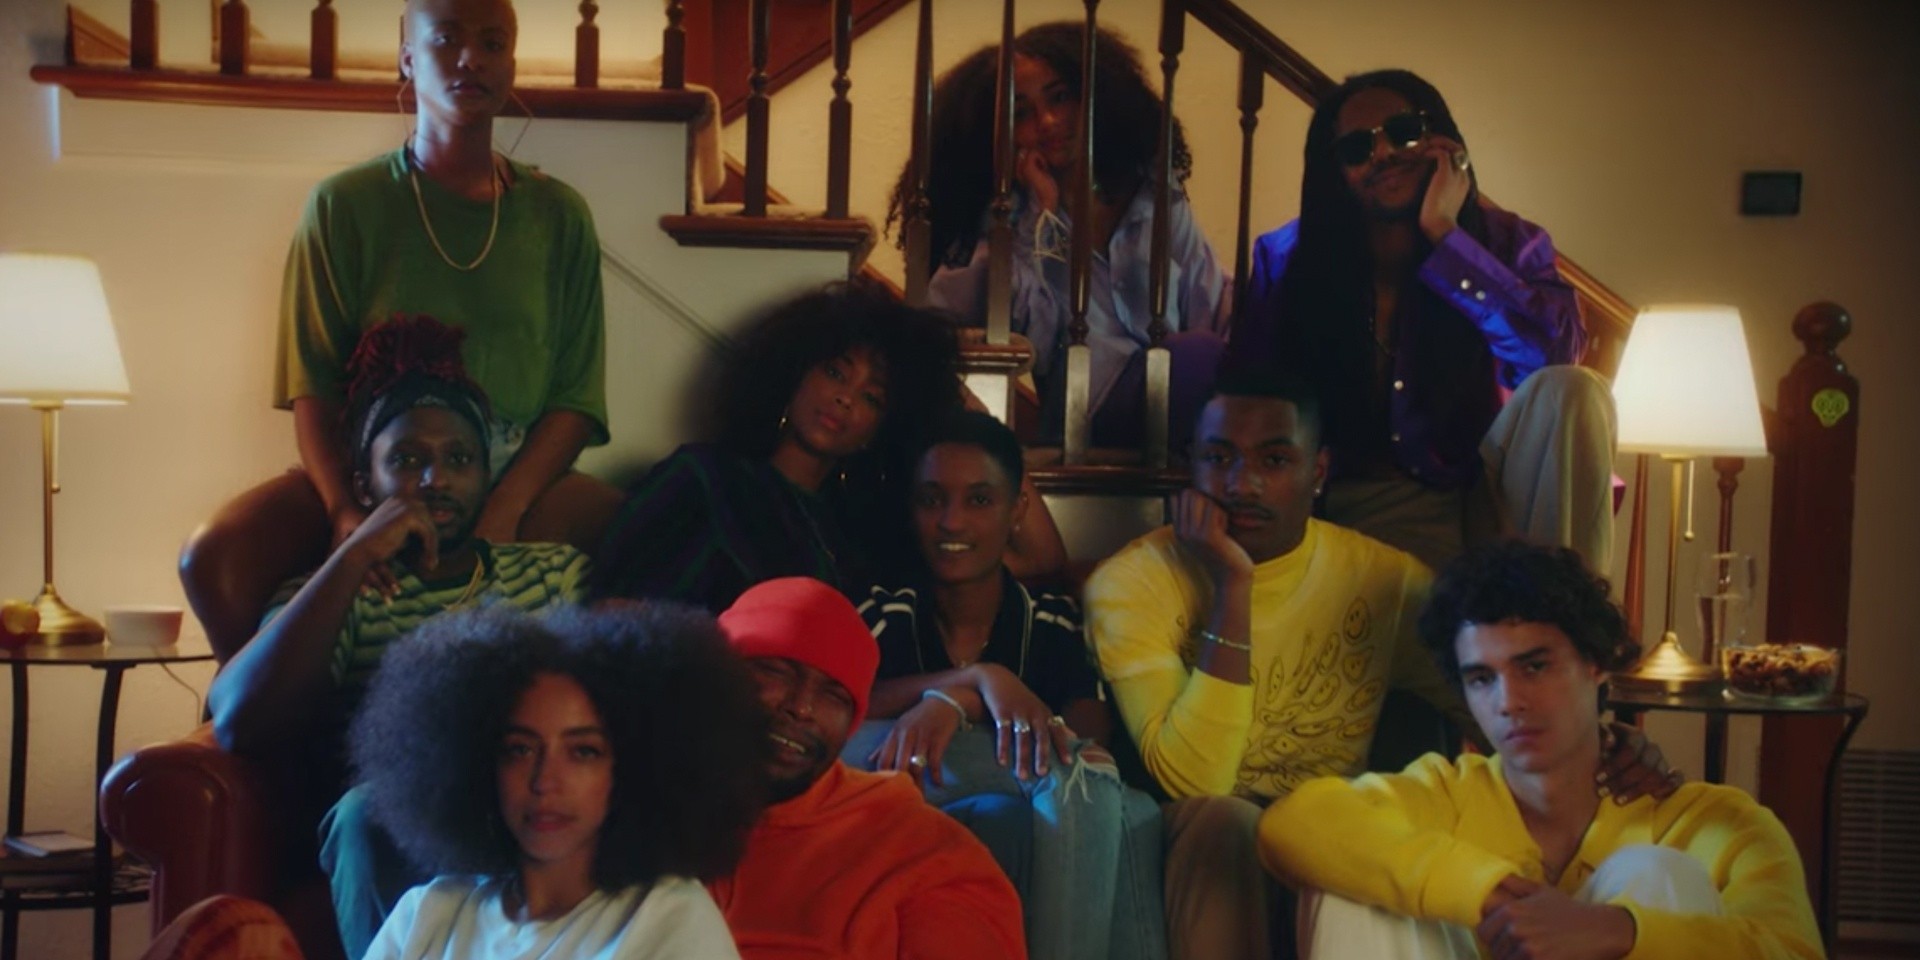 The Internet release vibrant music video for new song 'Come Over', directed by Syd – watch